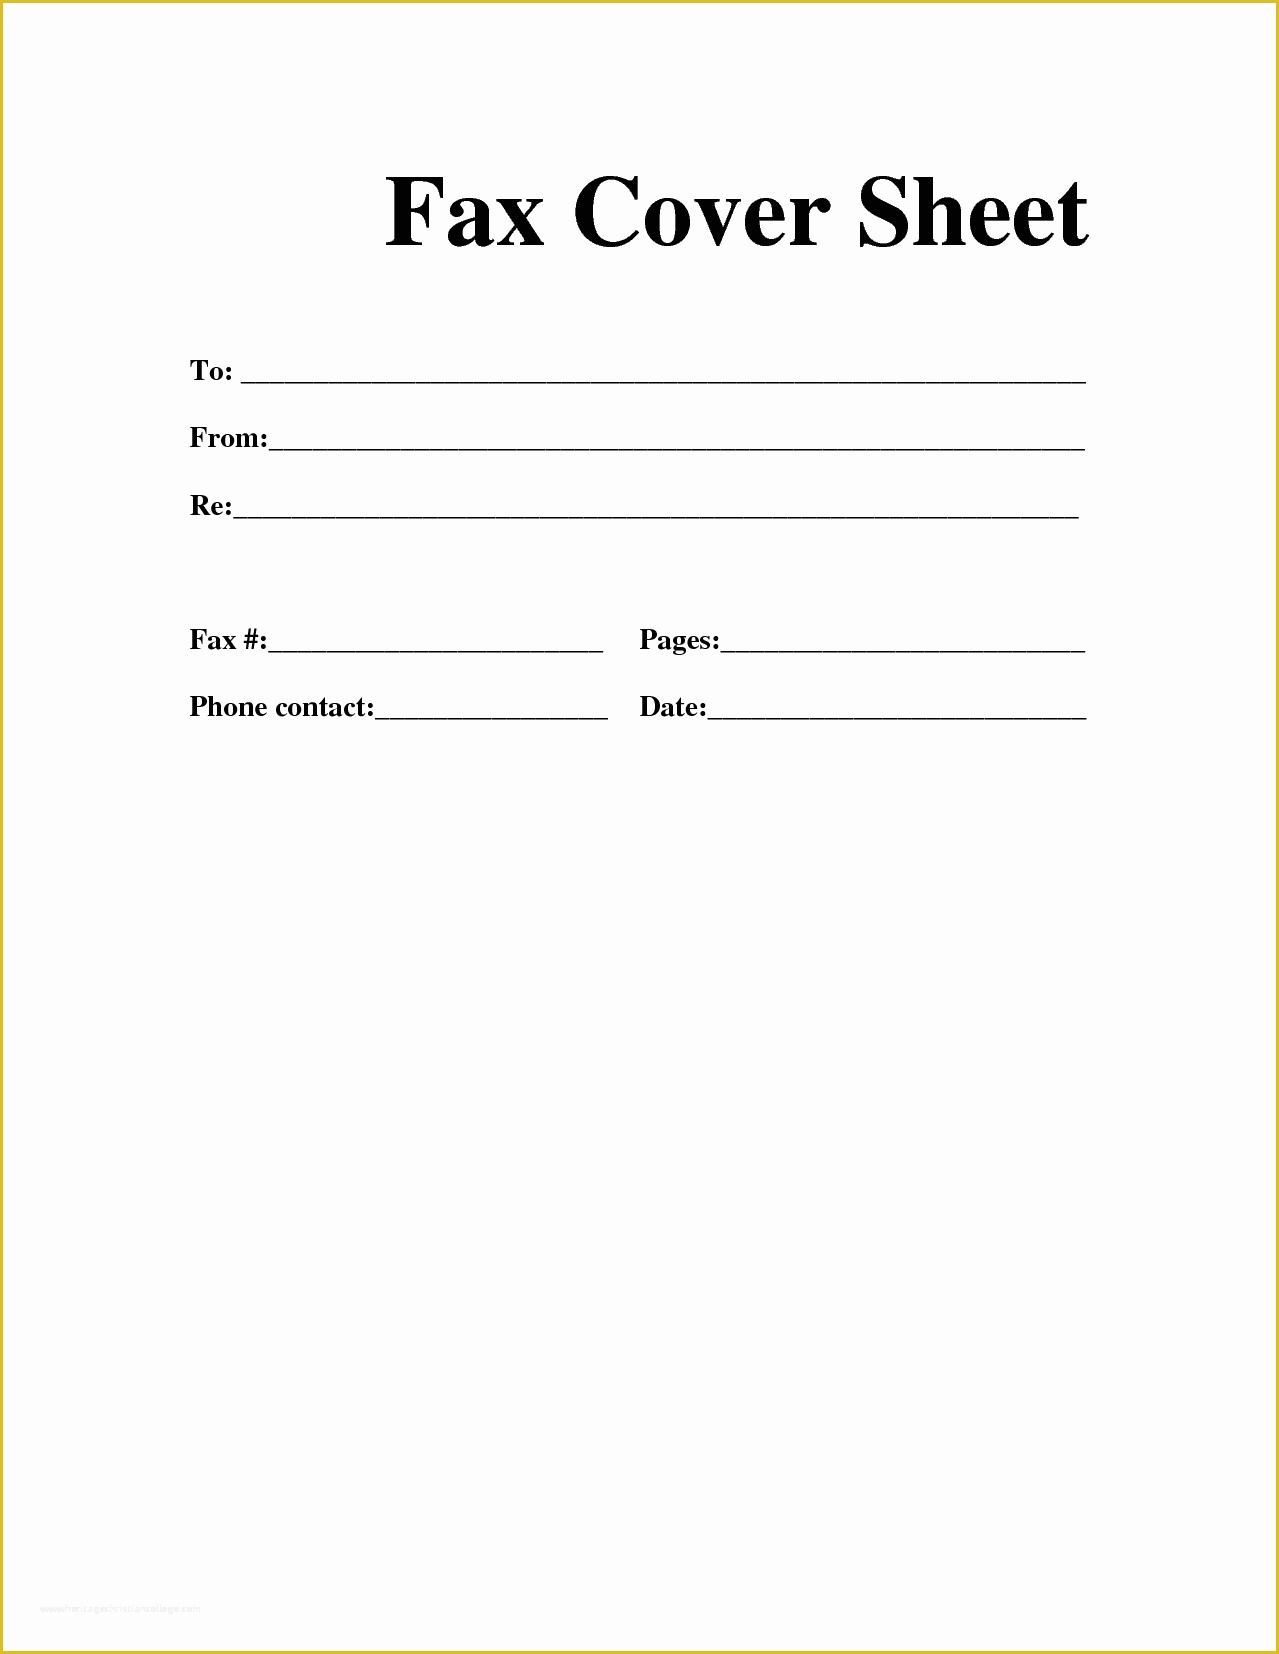 Free Printable Fax Cover Letter Template Of 6 Example Fax Cover Sheet